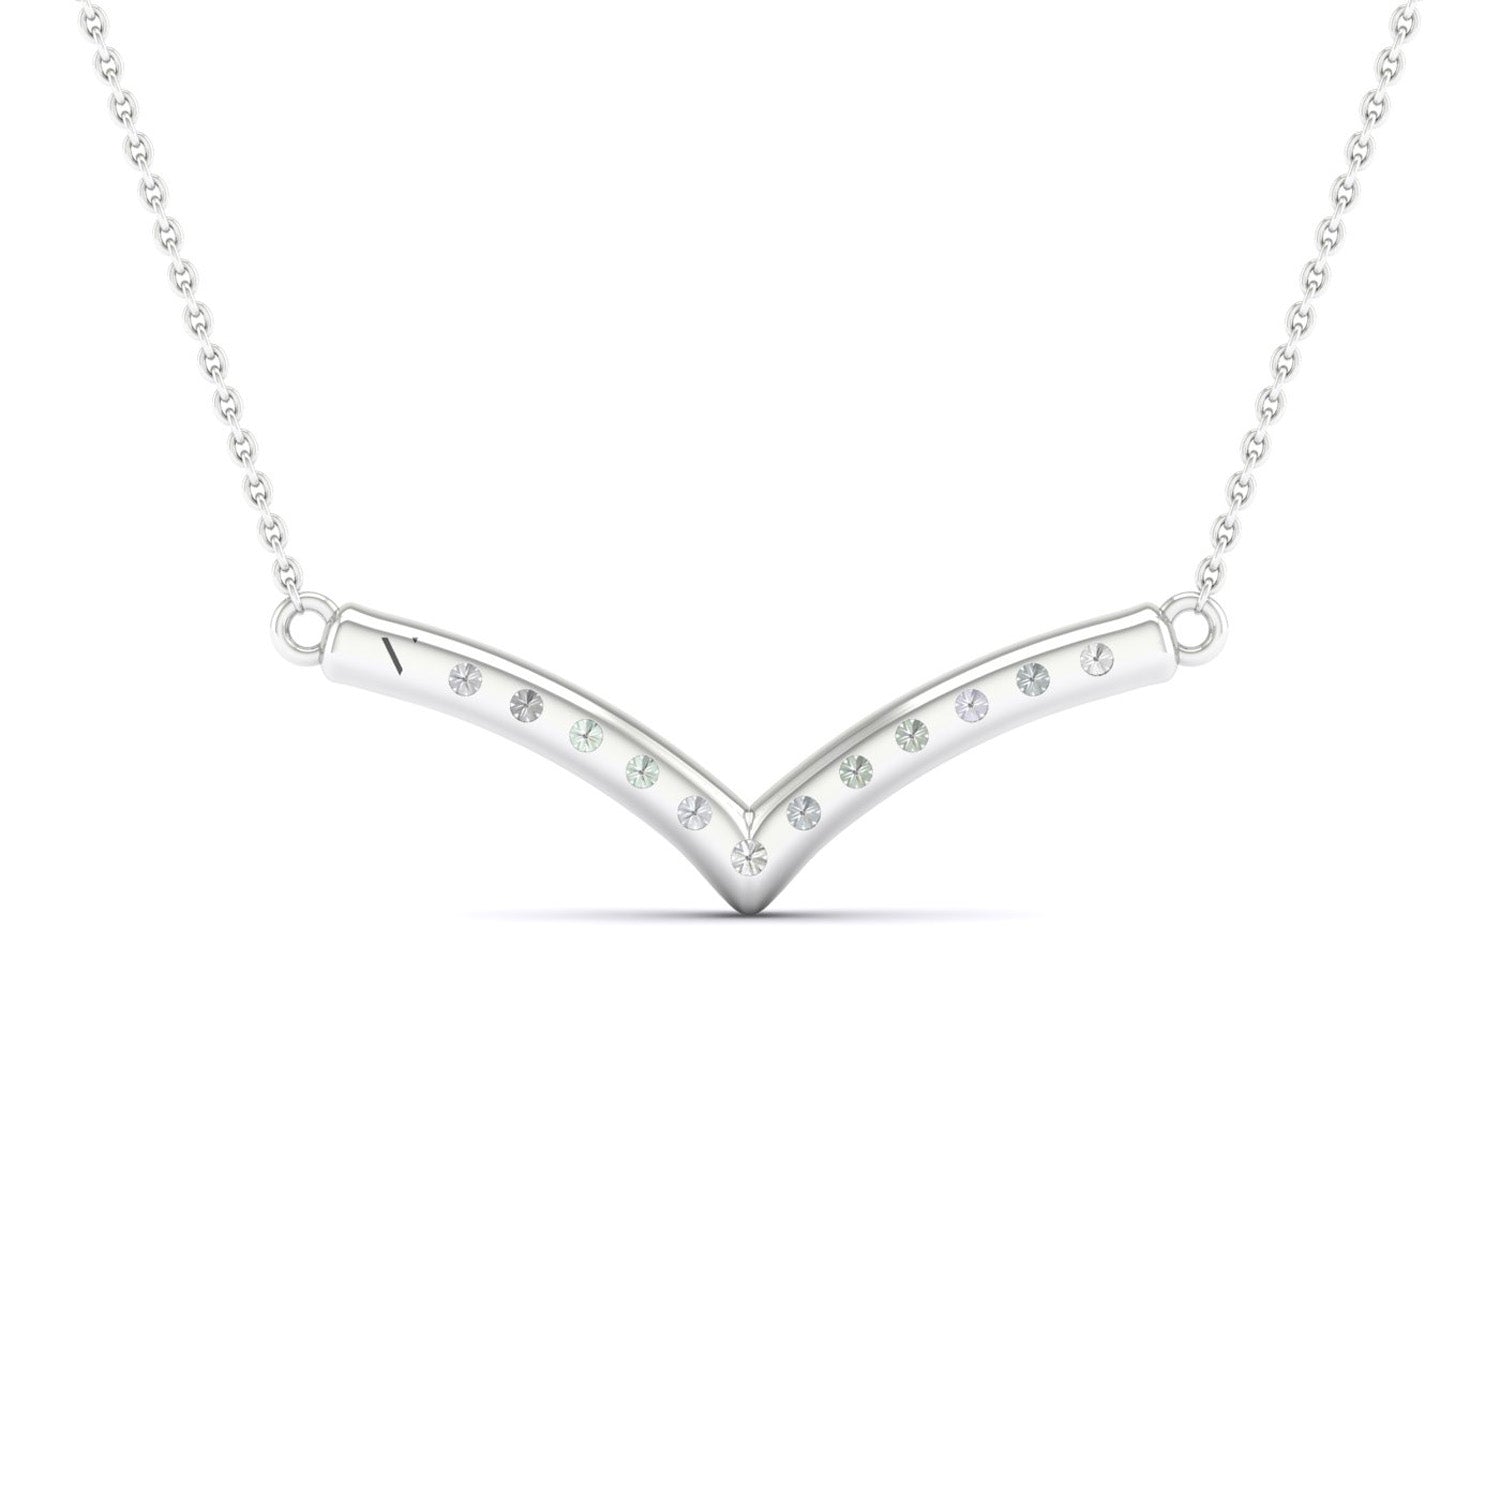 Ascending Chevron Necklace_Product Angle_0.10 - 3